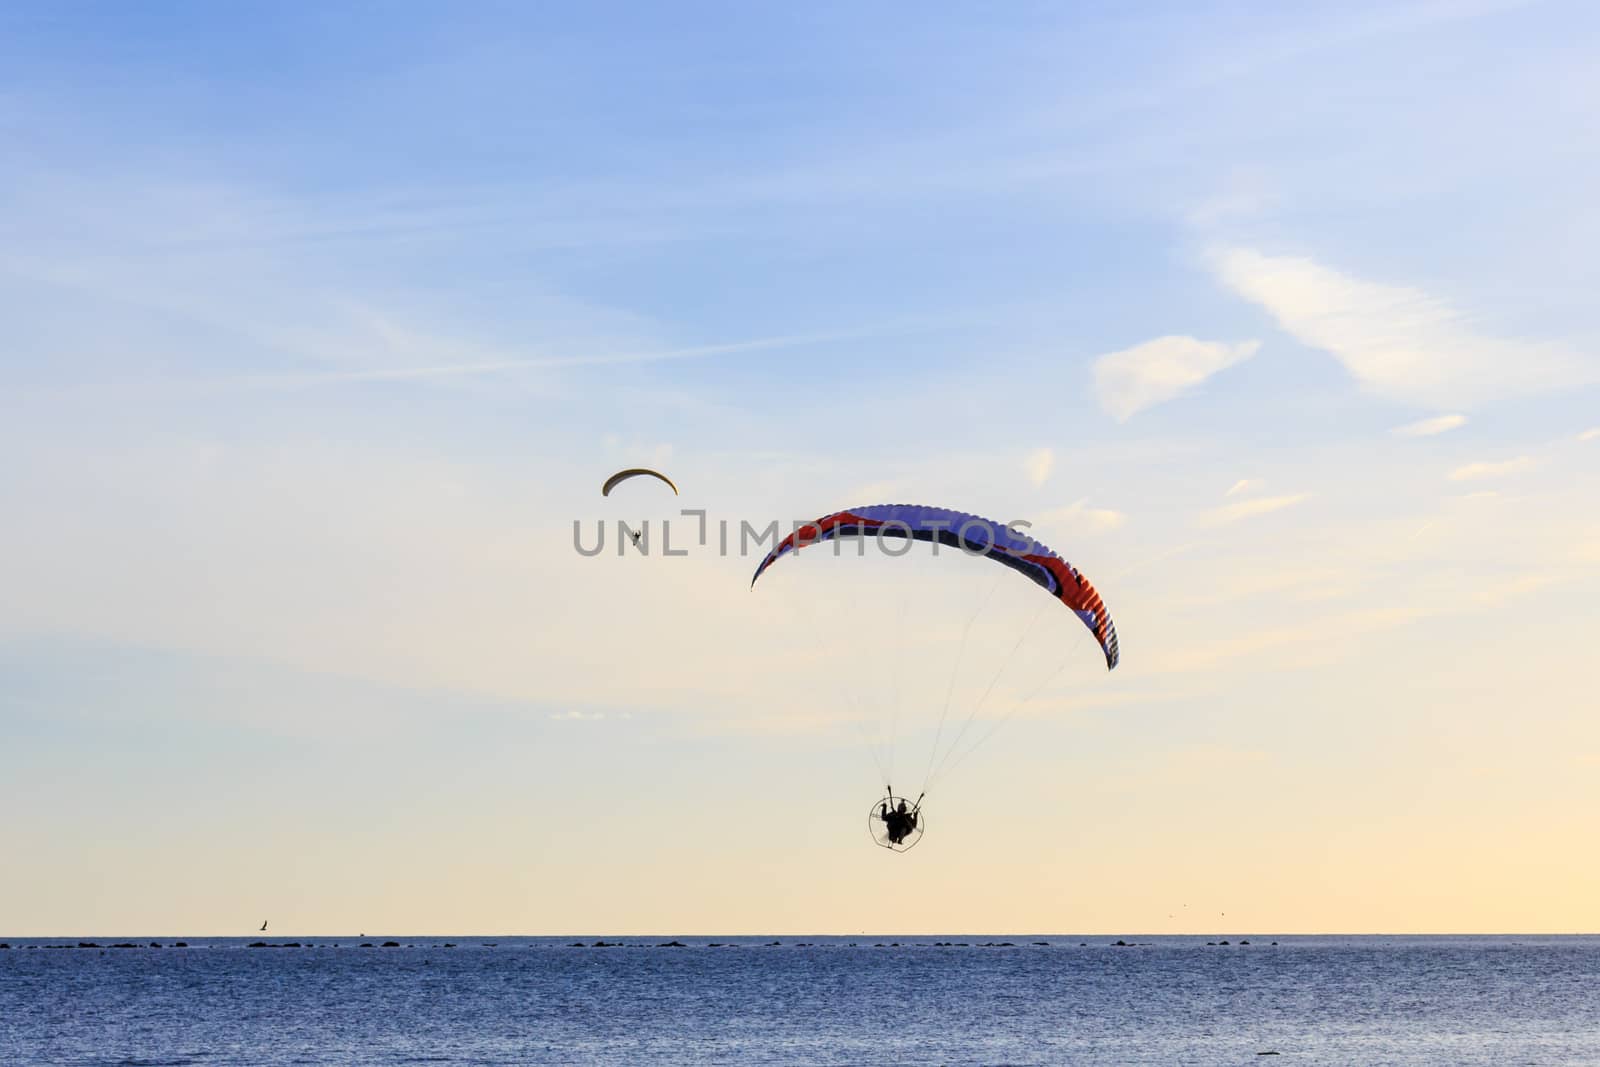 Powered paragliders by ernest_davies